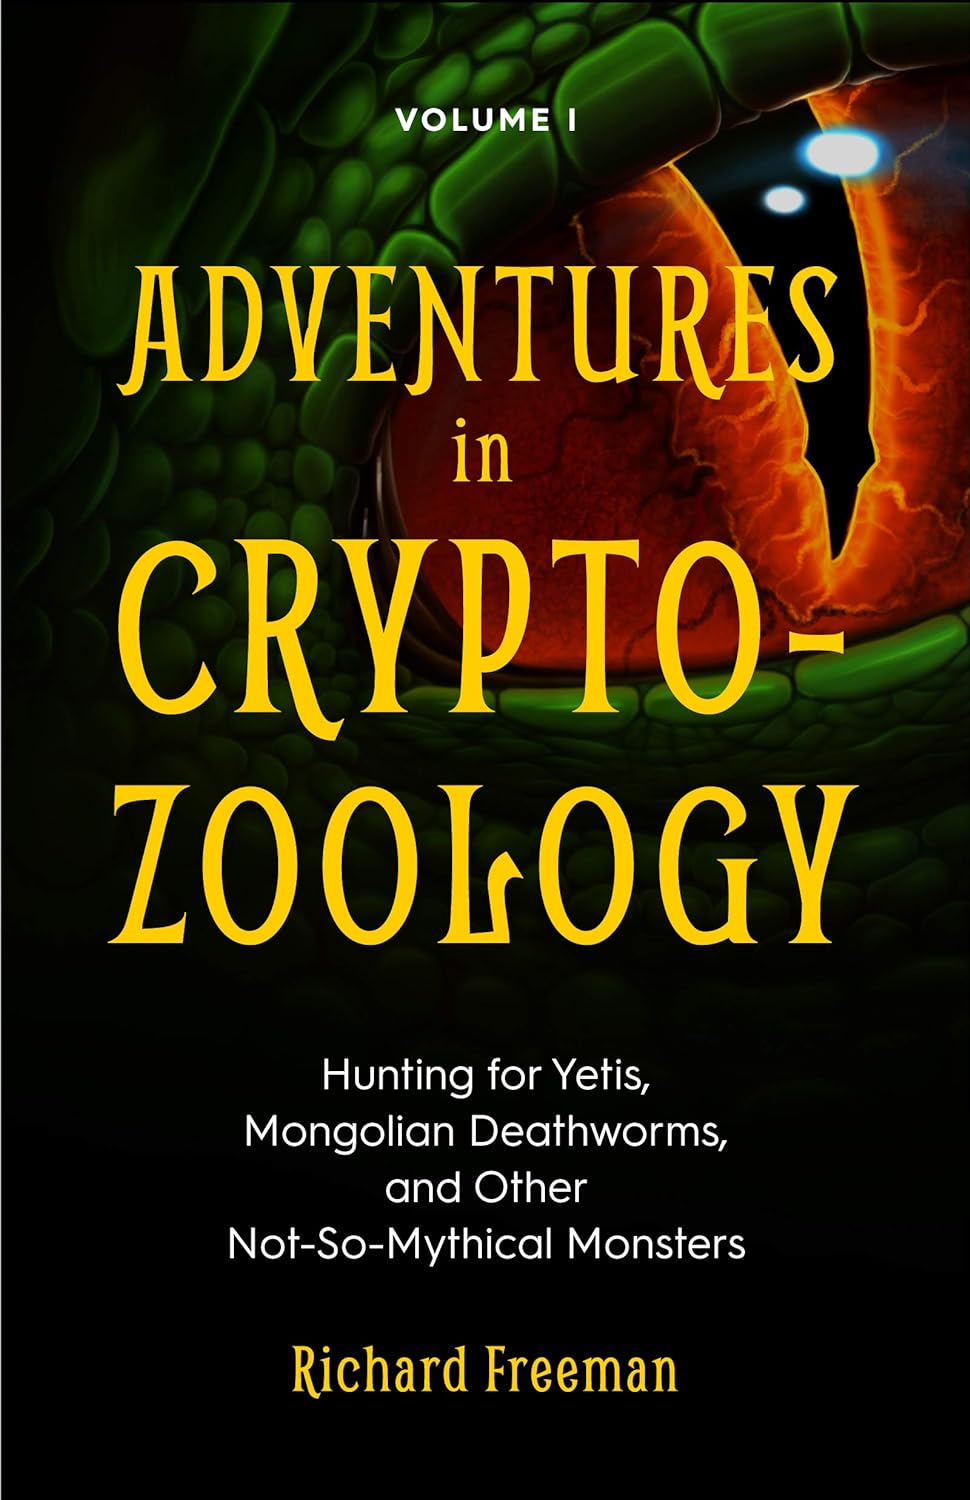 Adventures in Cryptozoology: Hunting for Yetis, Mongolian Deathworms and Other Not-So-Mythical Monsters